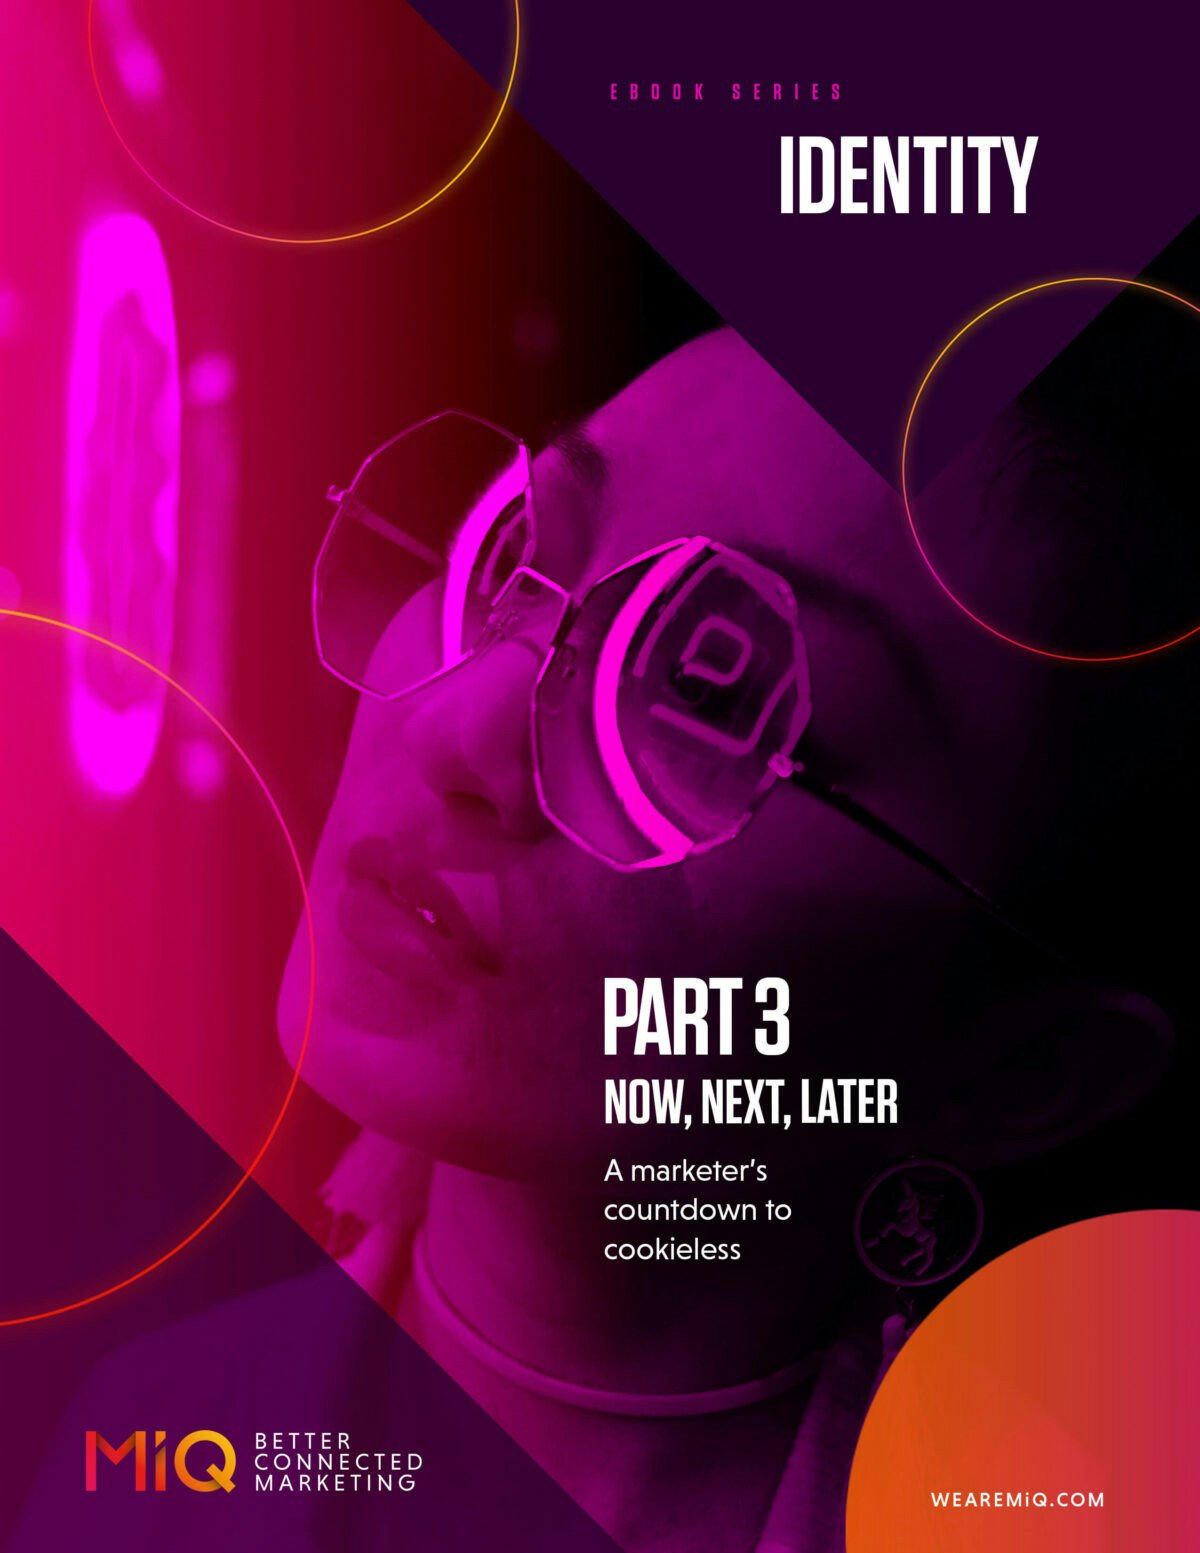 Identity: Now, next, later